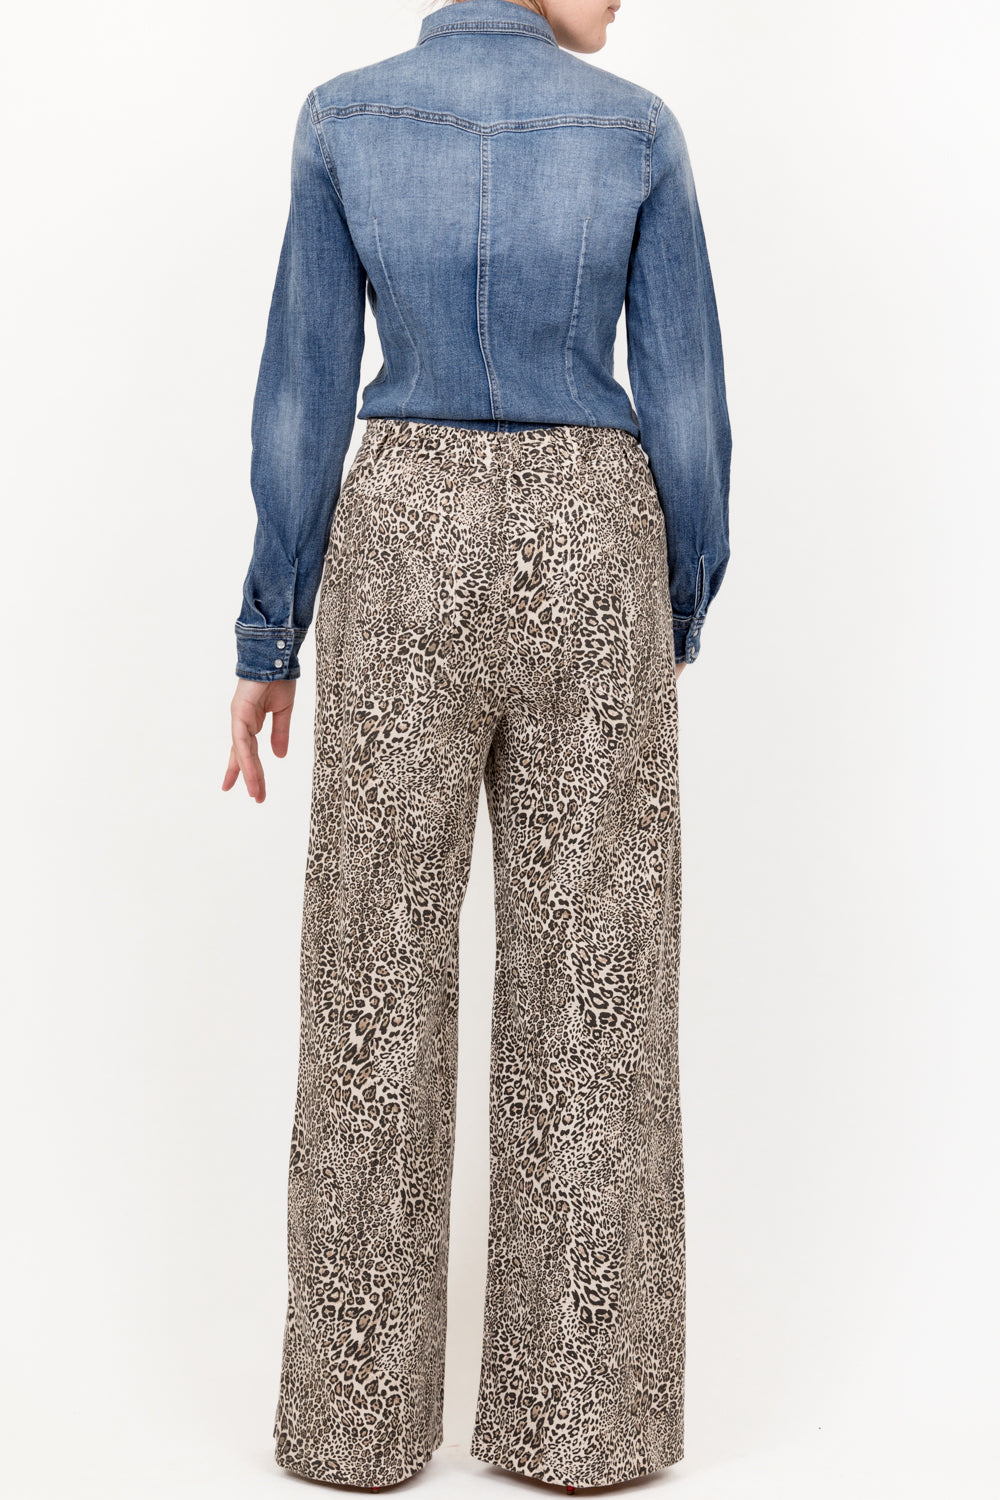 Tensione In - Pantalone coulisse animalier Art. P20461